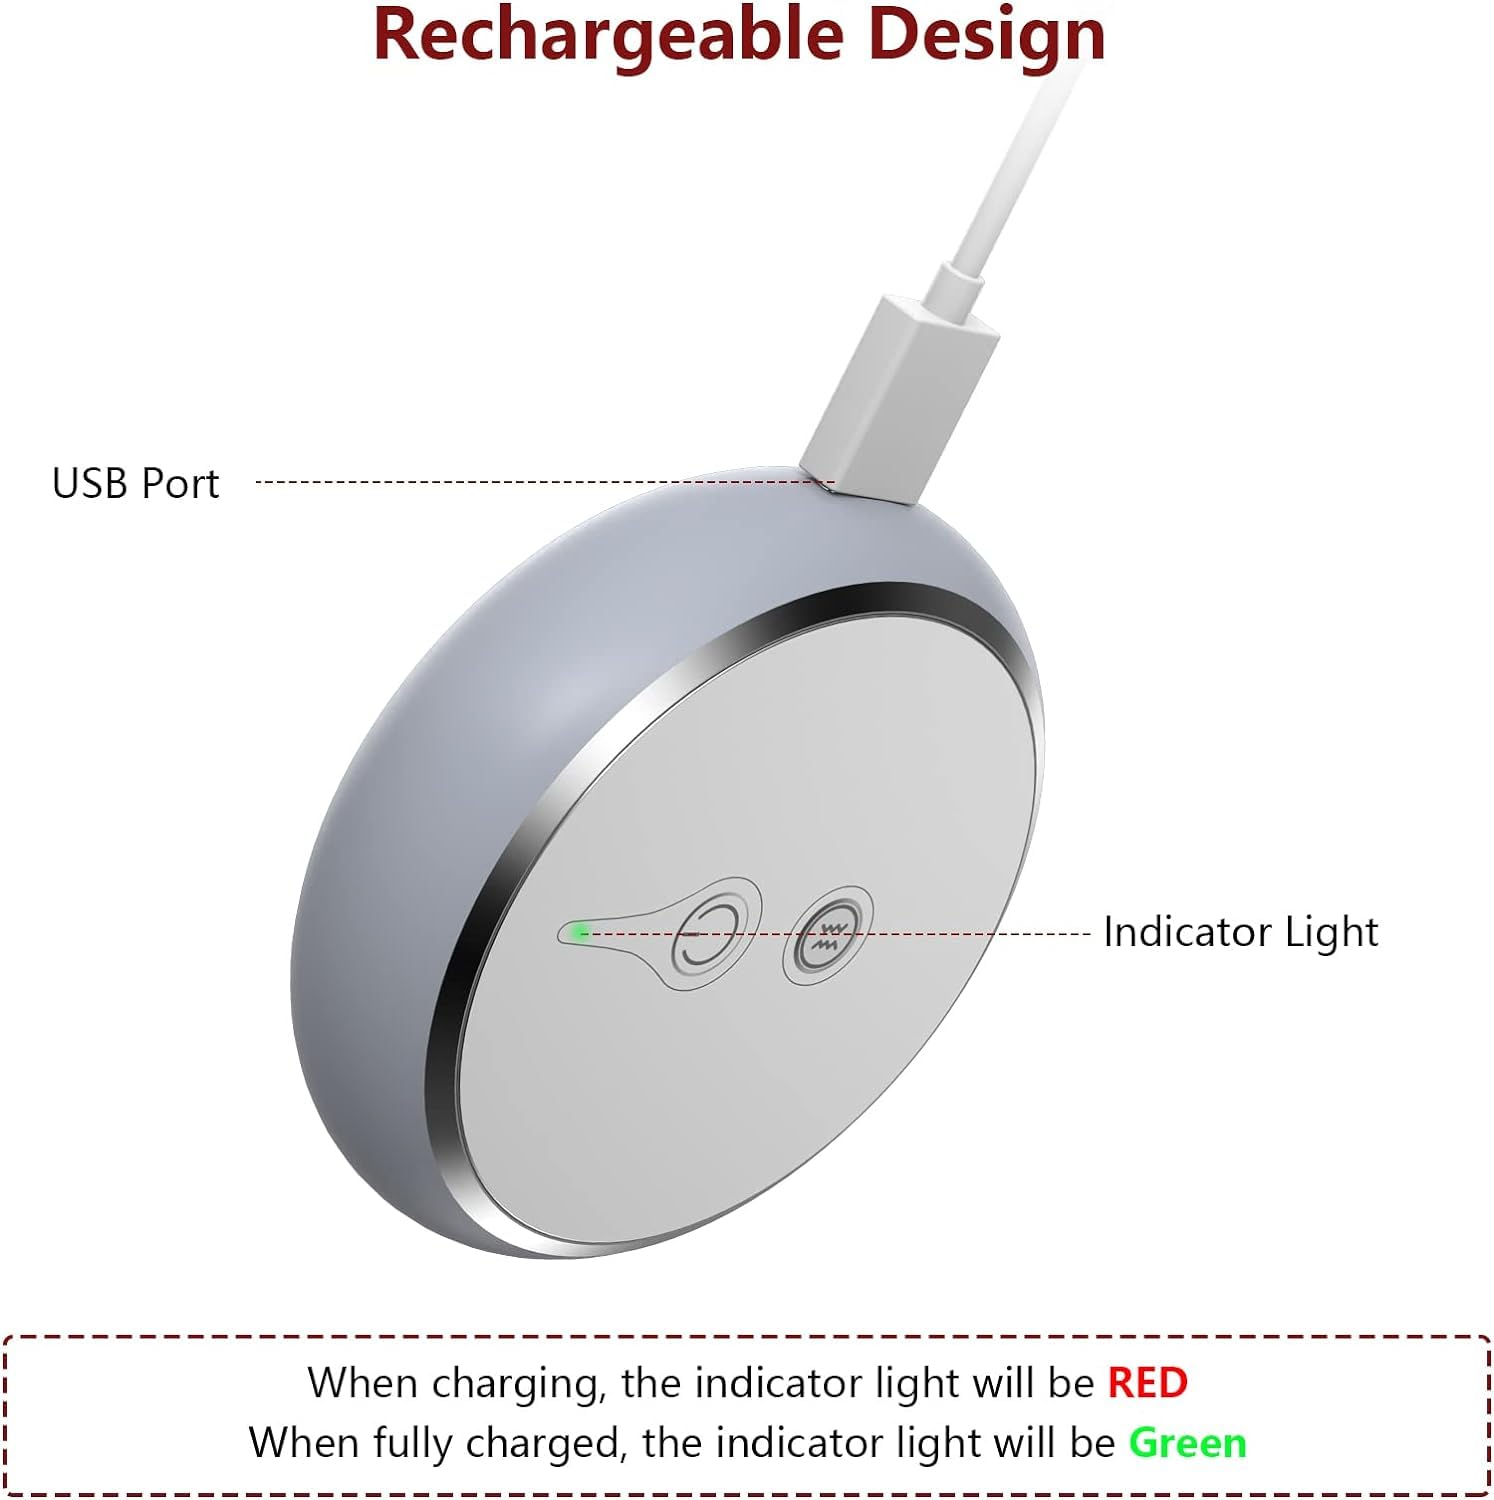 KTS® Portable Red Light Therapy Device